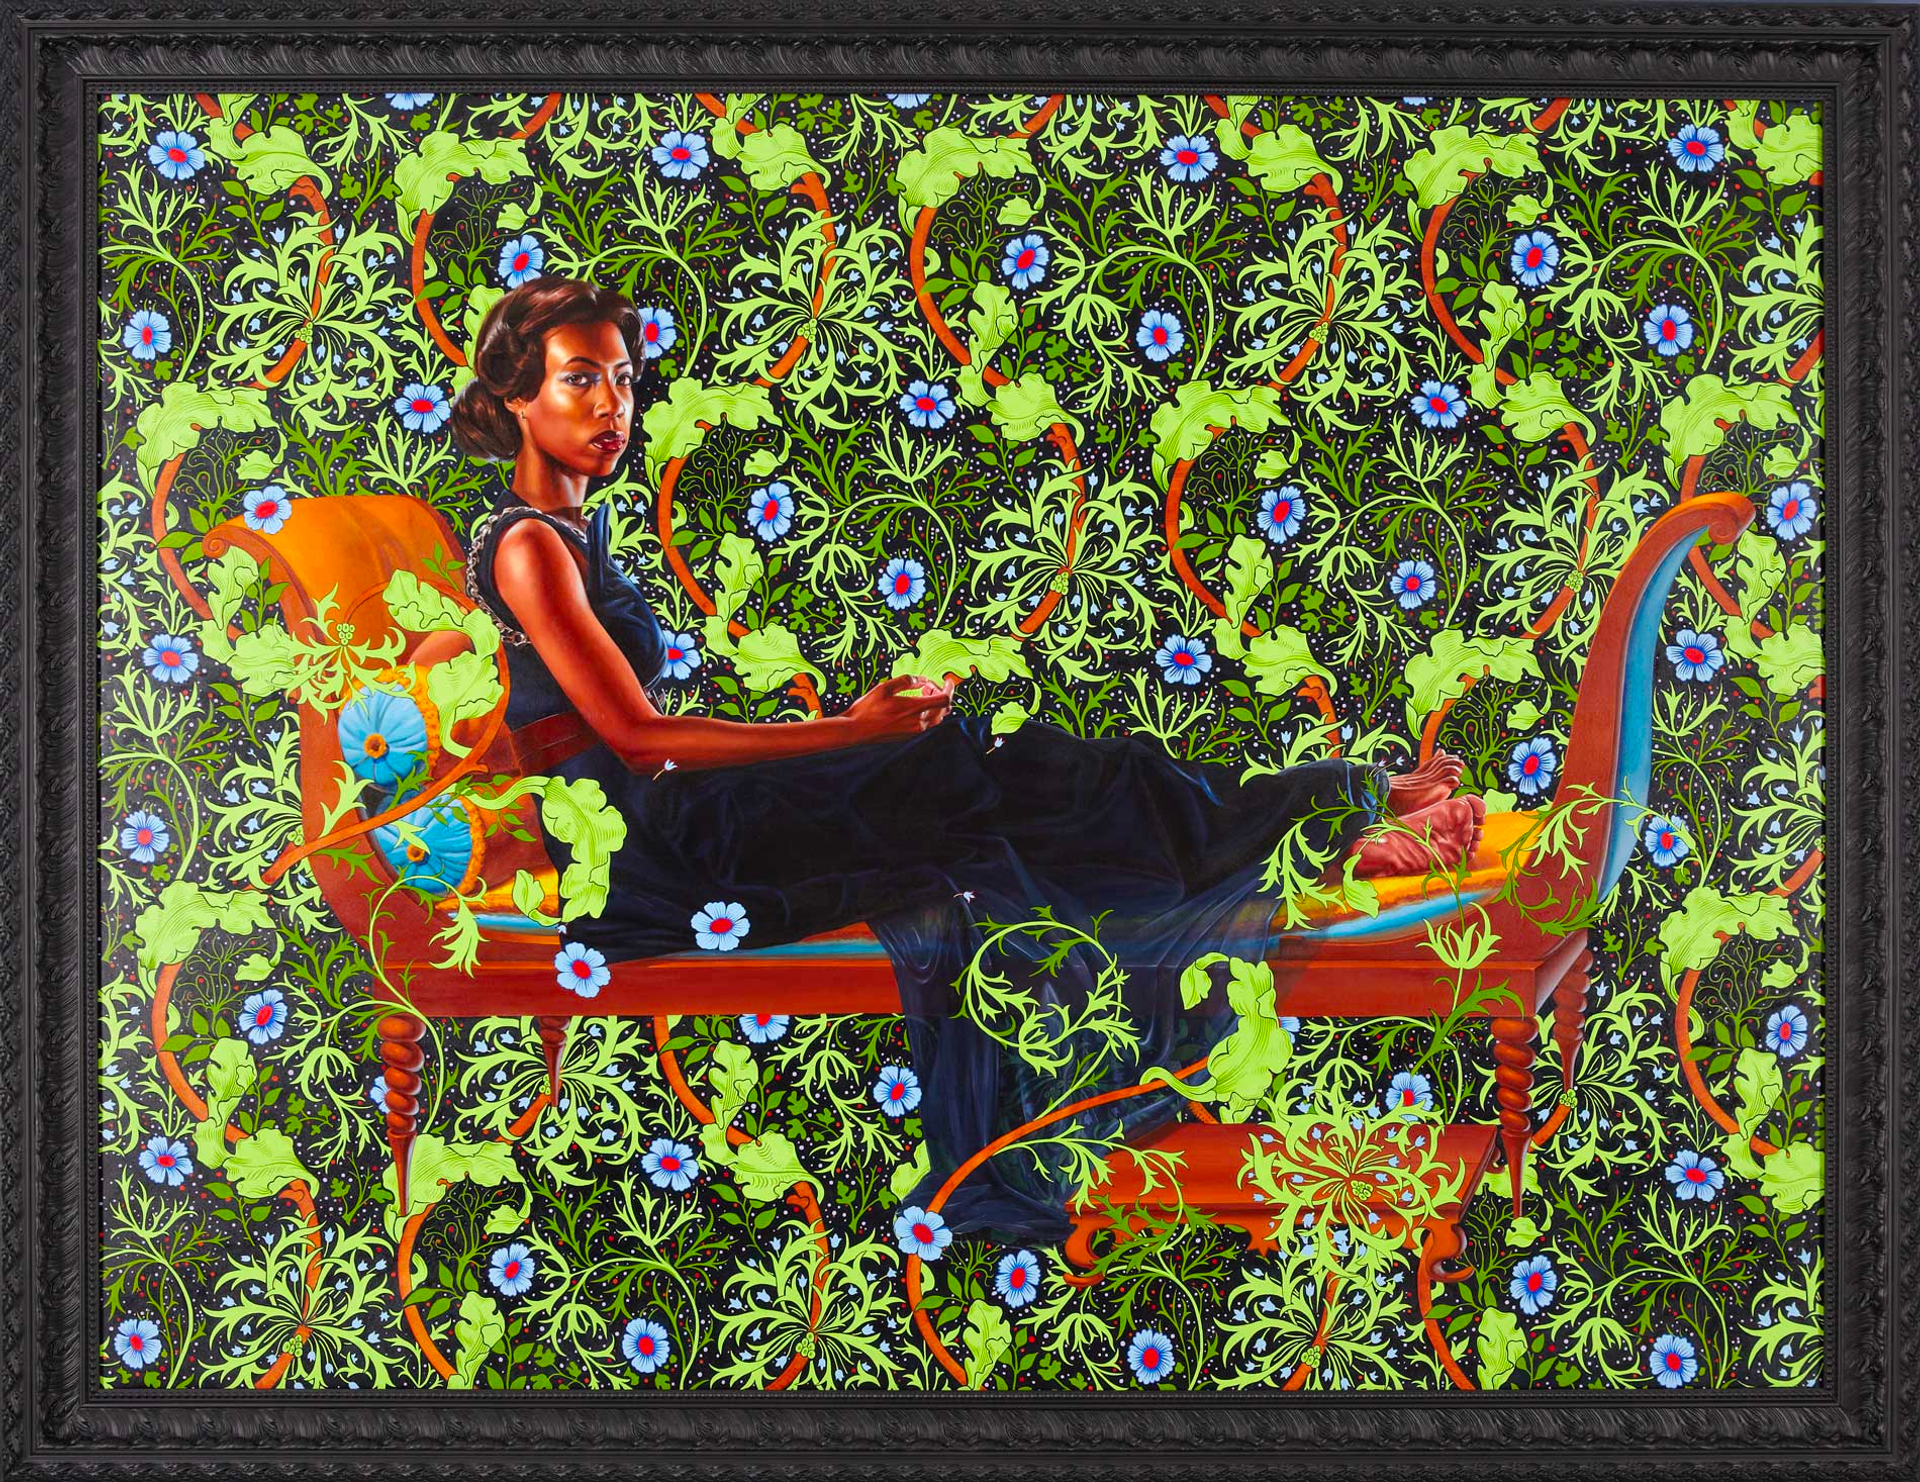 A black woman in a navy blue ball gown sits on a golden brown chaise lounge with turquoise blue cushions. She makes eye contact with the viewer against a vibrant green foliage background adorned with blue flowers.